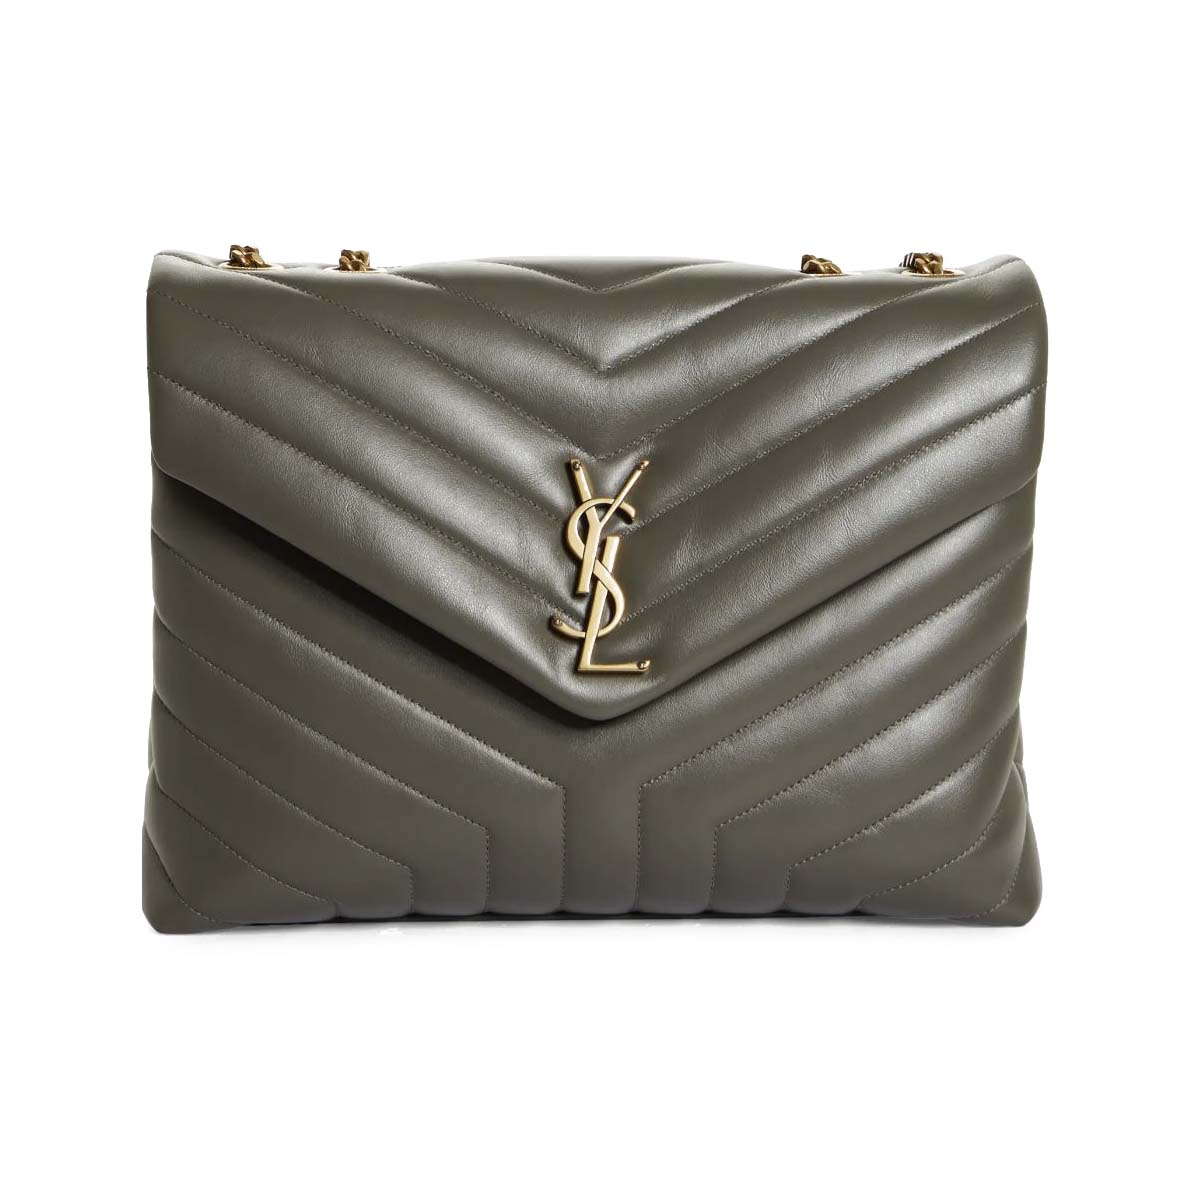 saint laurent envelope small,Save up to 16%